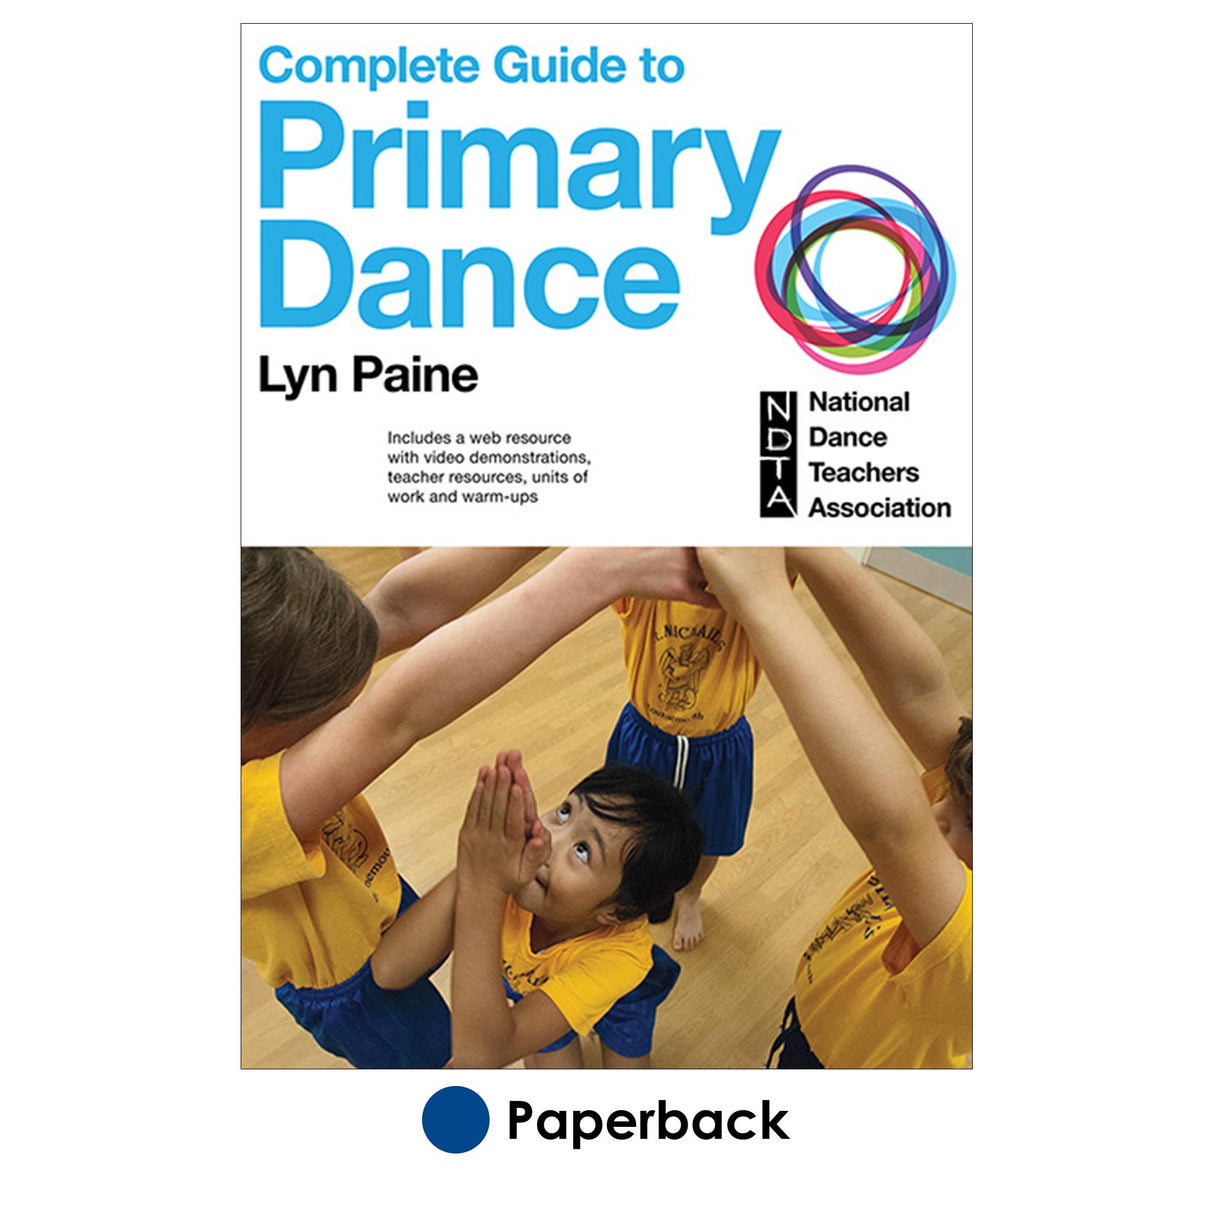 Complete Guide to Primary Dance With Web Resource